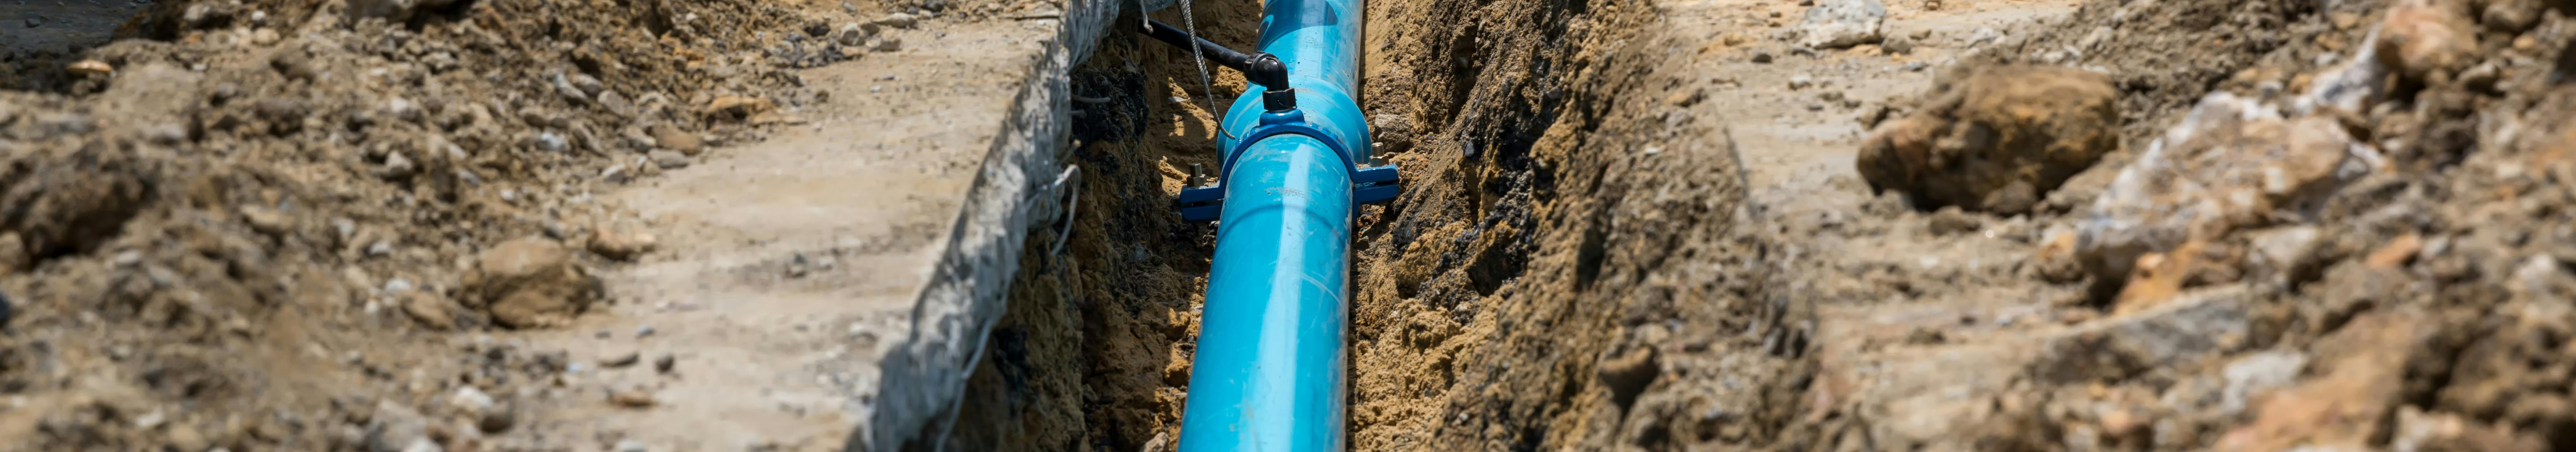 Stock photo of waste water infrastructure being installed